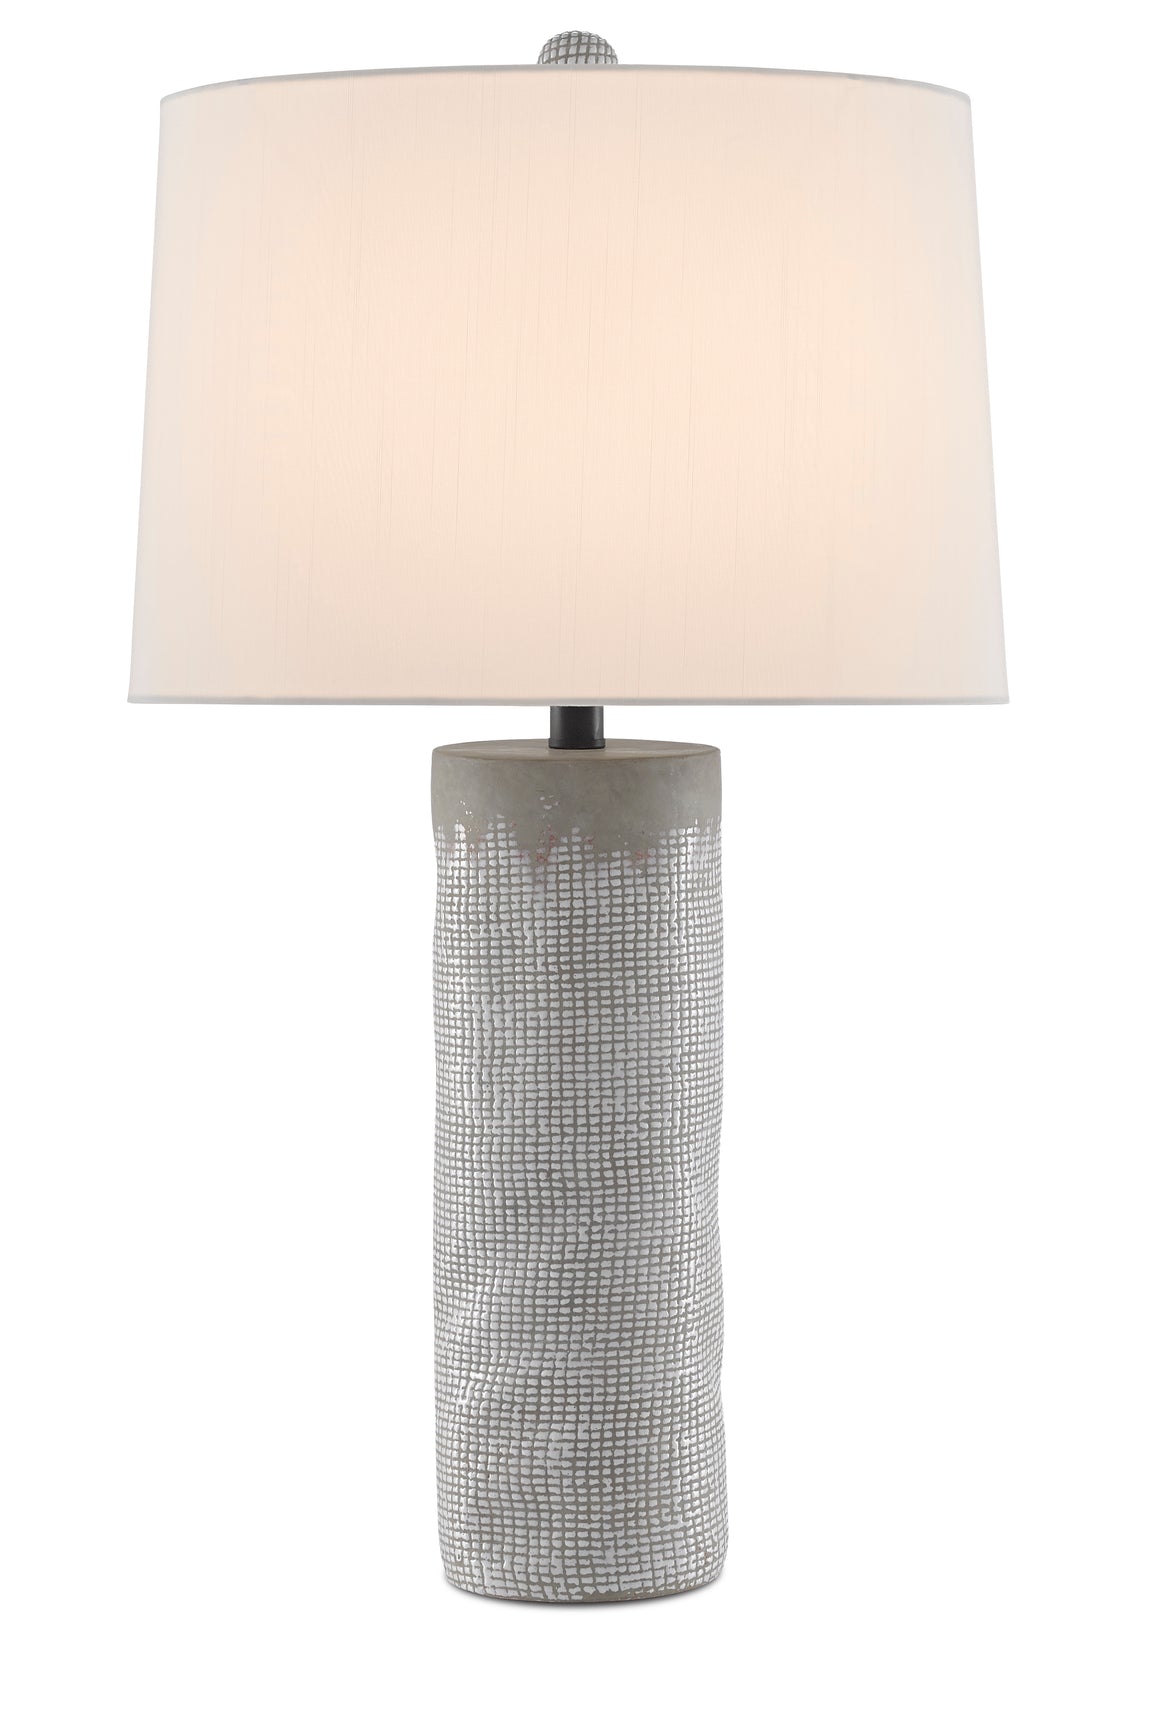 Currey and Company Perla Table Lamp